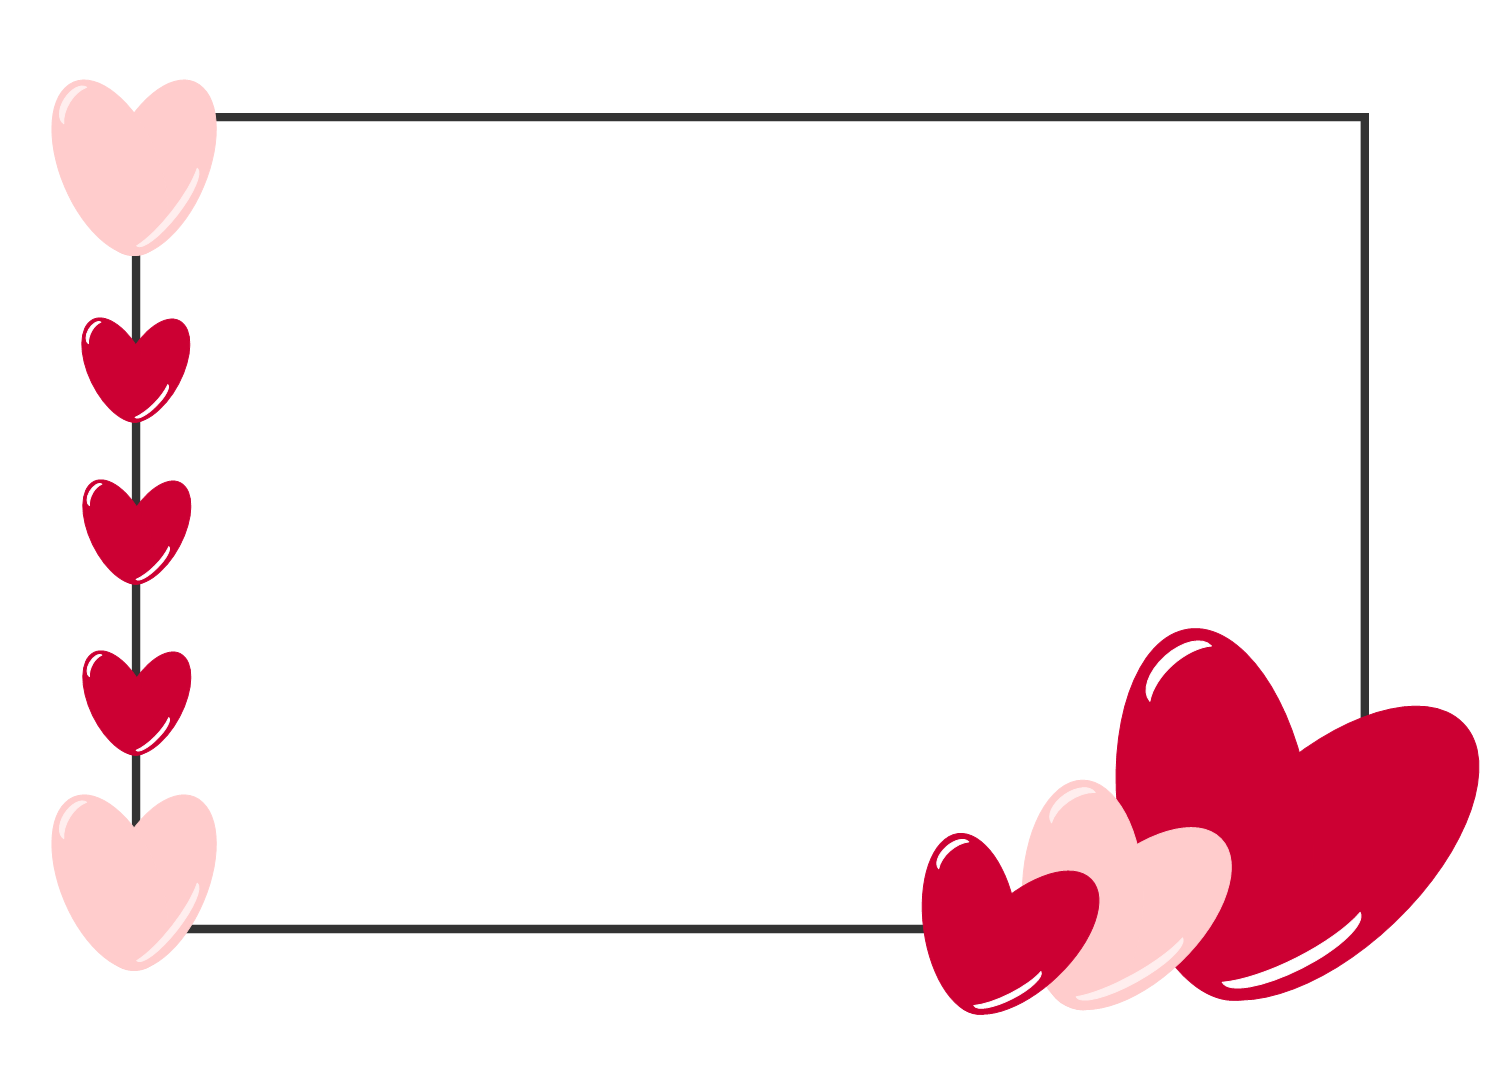 Free Clipart N Images: Free Valentine Card Template1500 x 1090